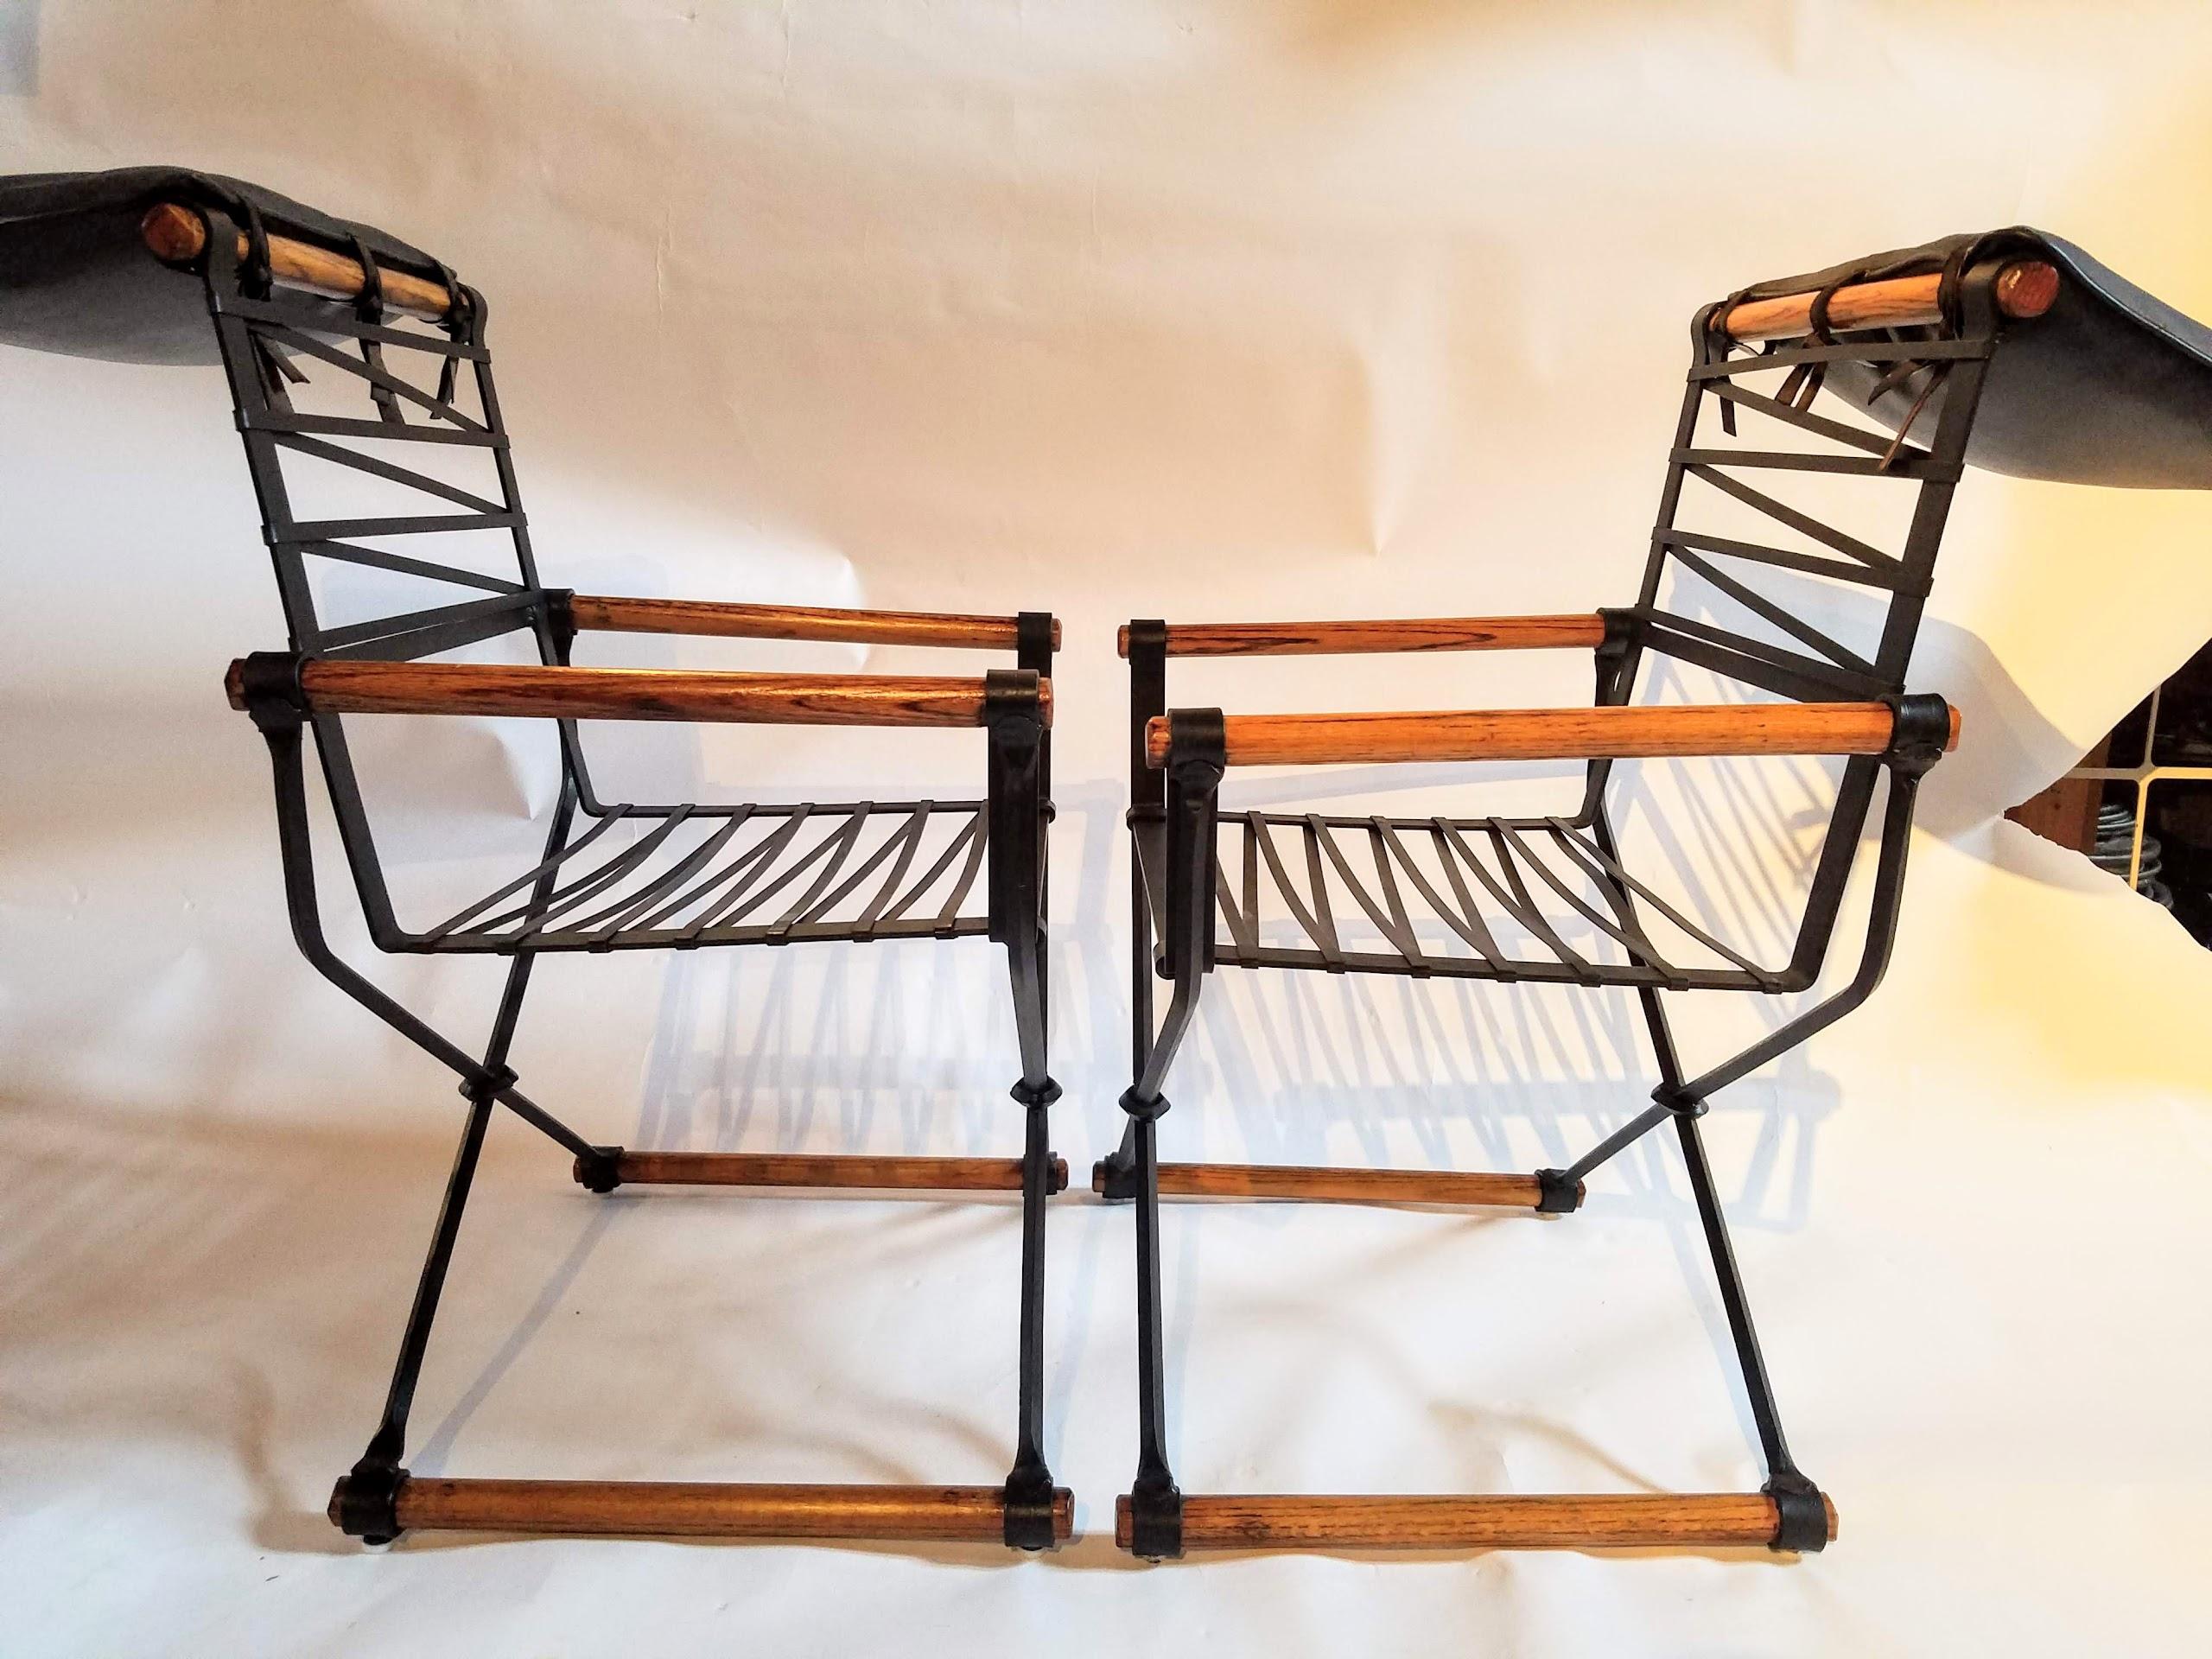 Lacquered Cleo Baldon Pair of Campaign Chairs Hand Crafted Wrought Iron Terra Studio 1960s